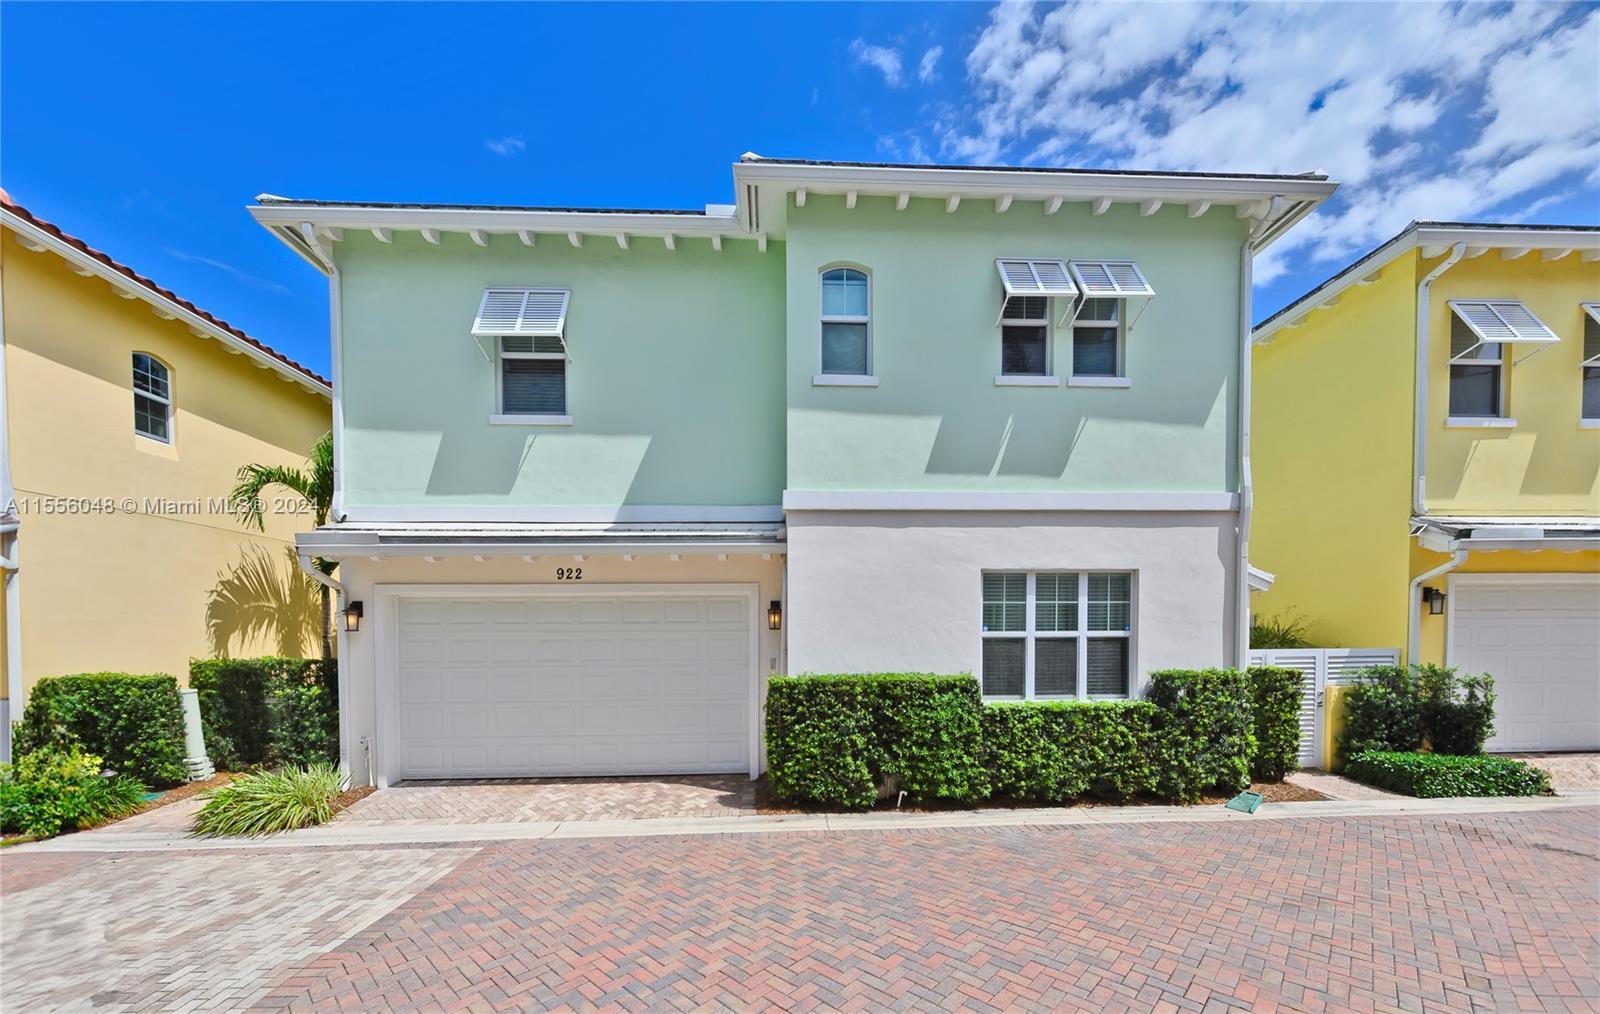 Photo of 922 NE 17th Wy in Fort Lauderdale, FL